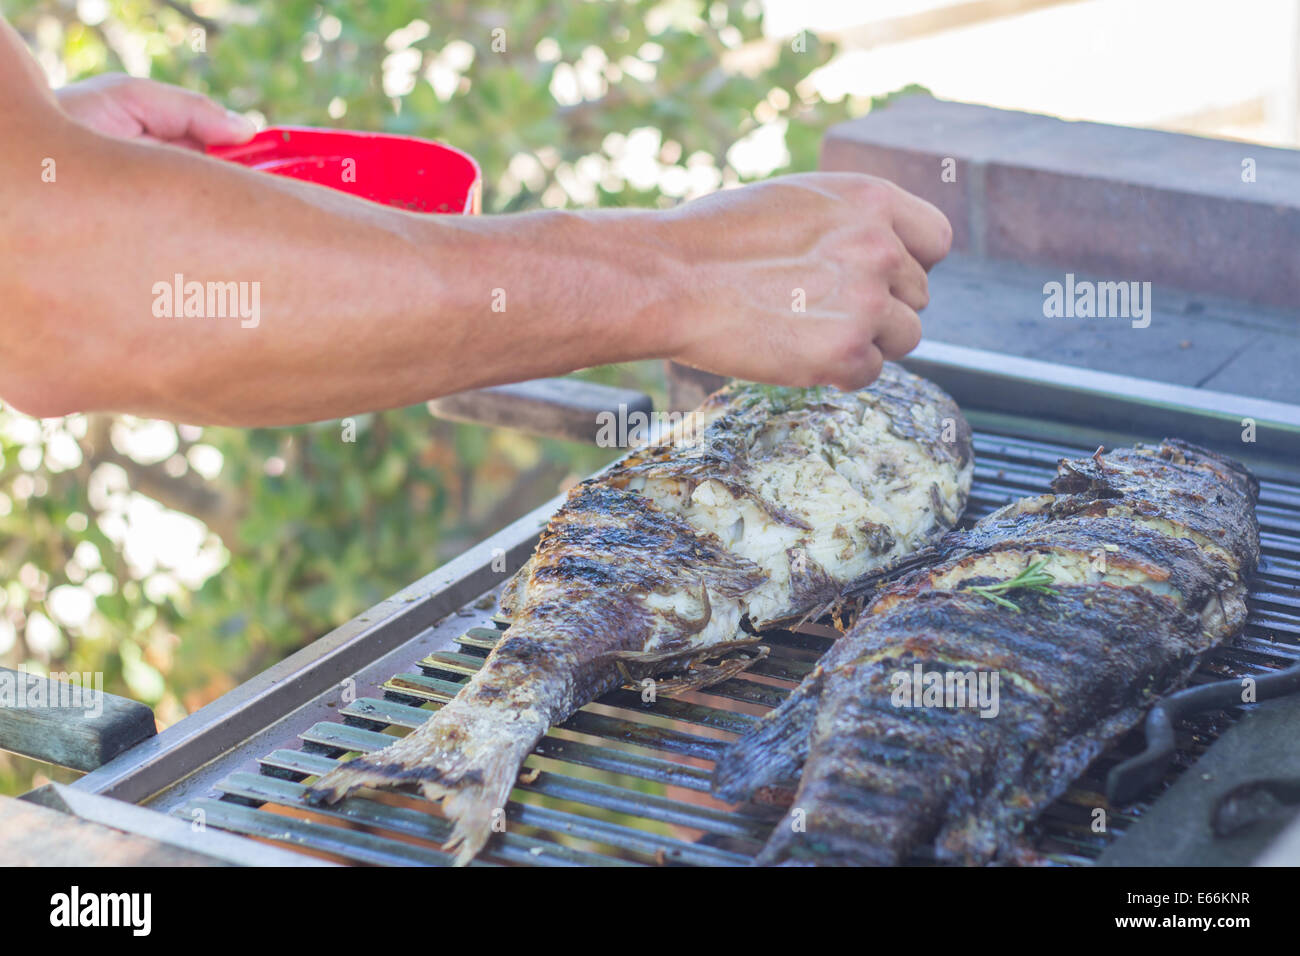 man preparing cooking fish grill hands closeup gilled Stock Photo